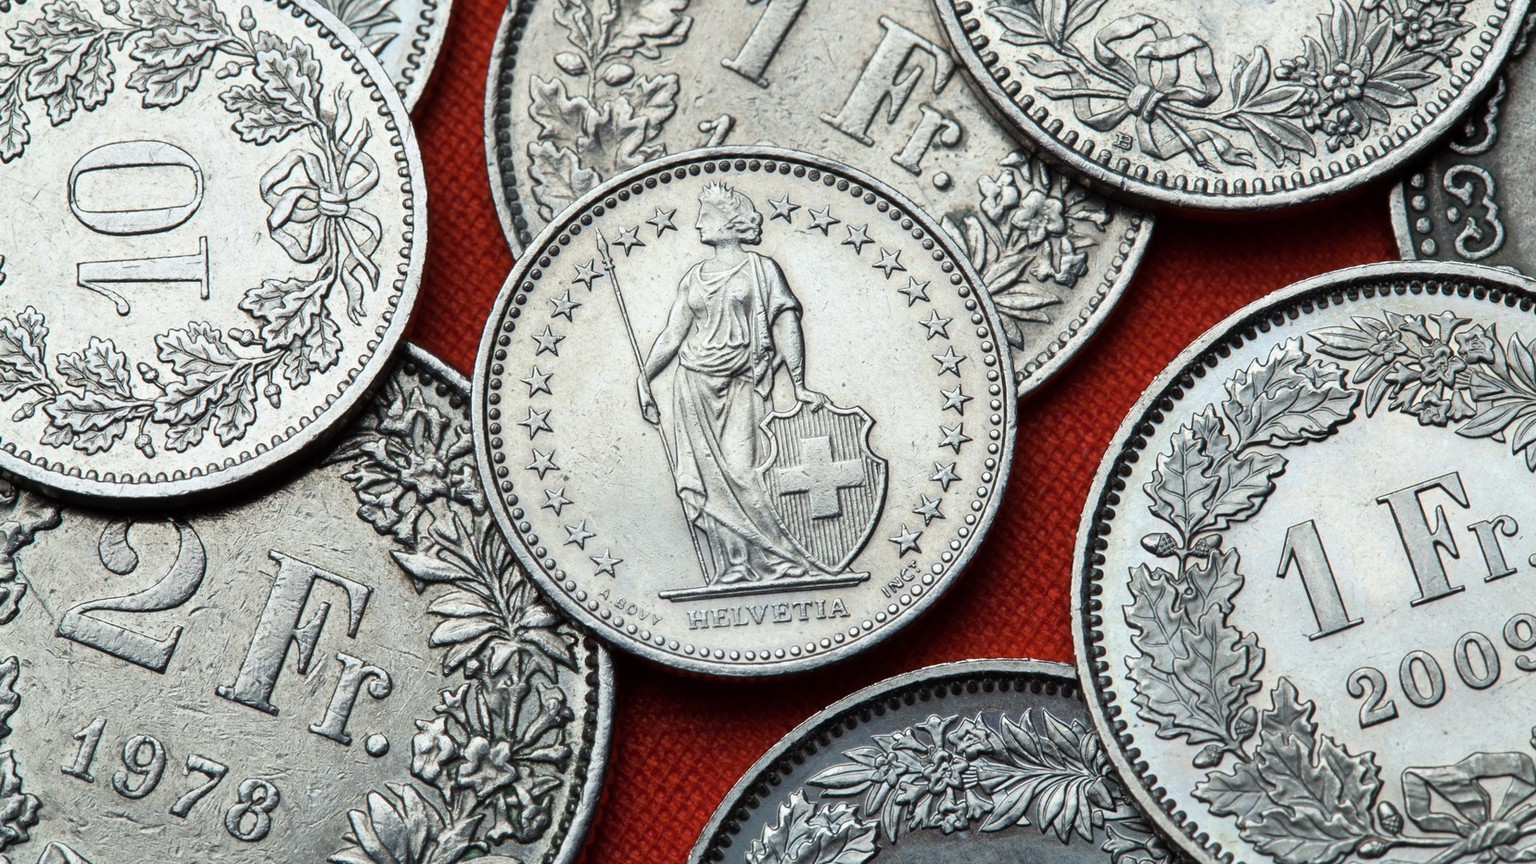 Coins of Switzerland. Standing Helvetia depicted in the Swiss half franc coin.